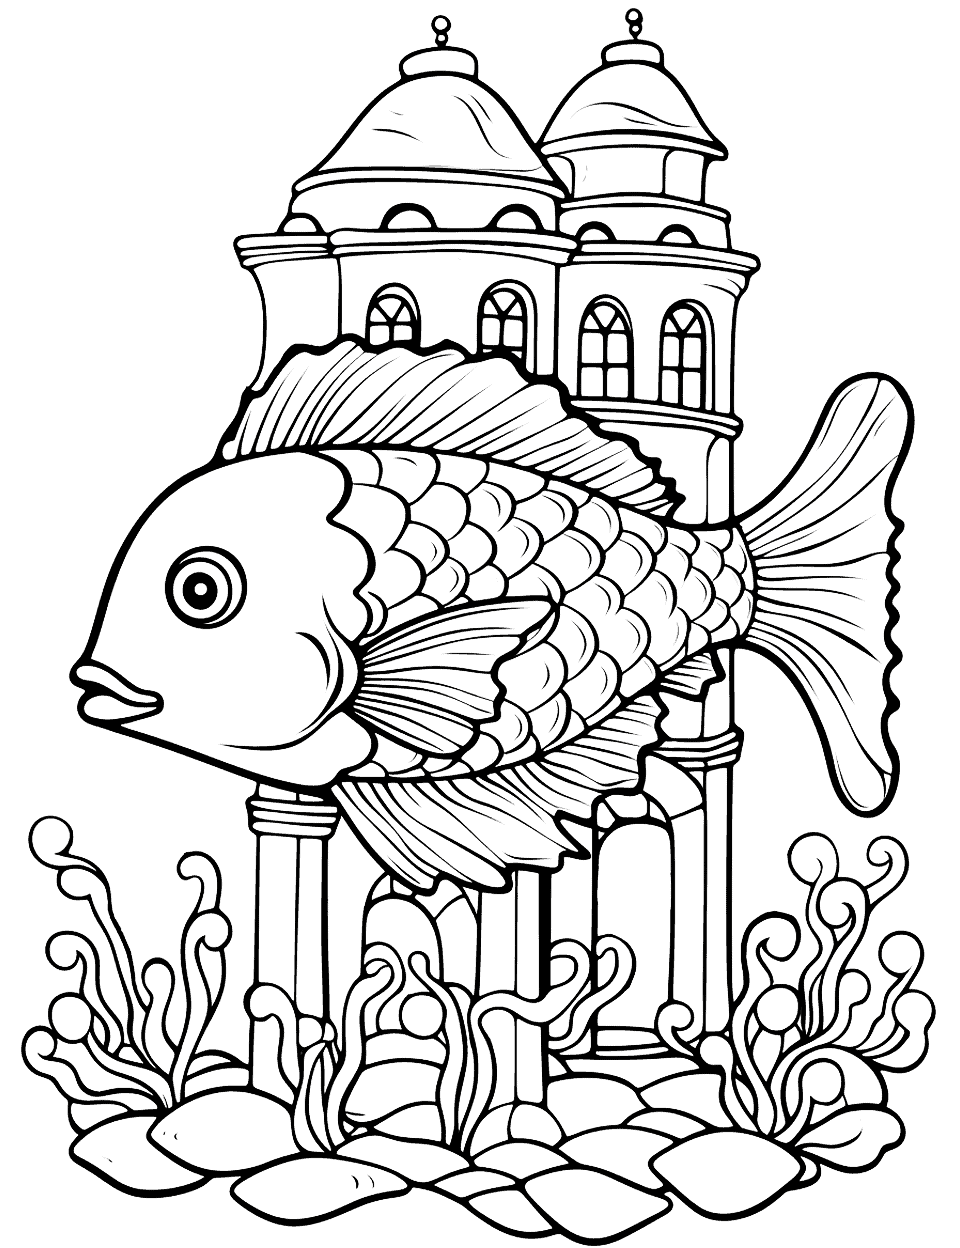 Coral Castle Playground Fish Coloring Page - Fish playing around an underwater coral castle.